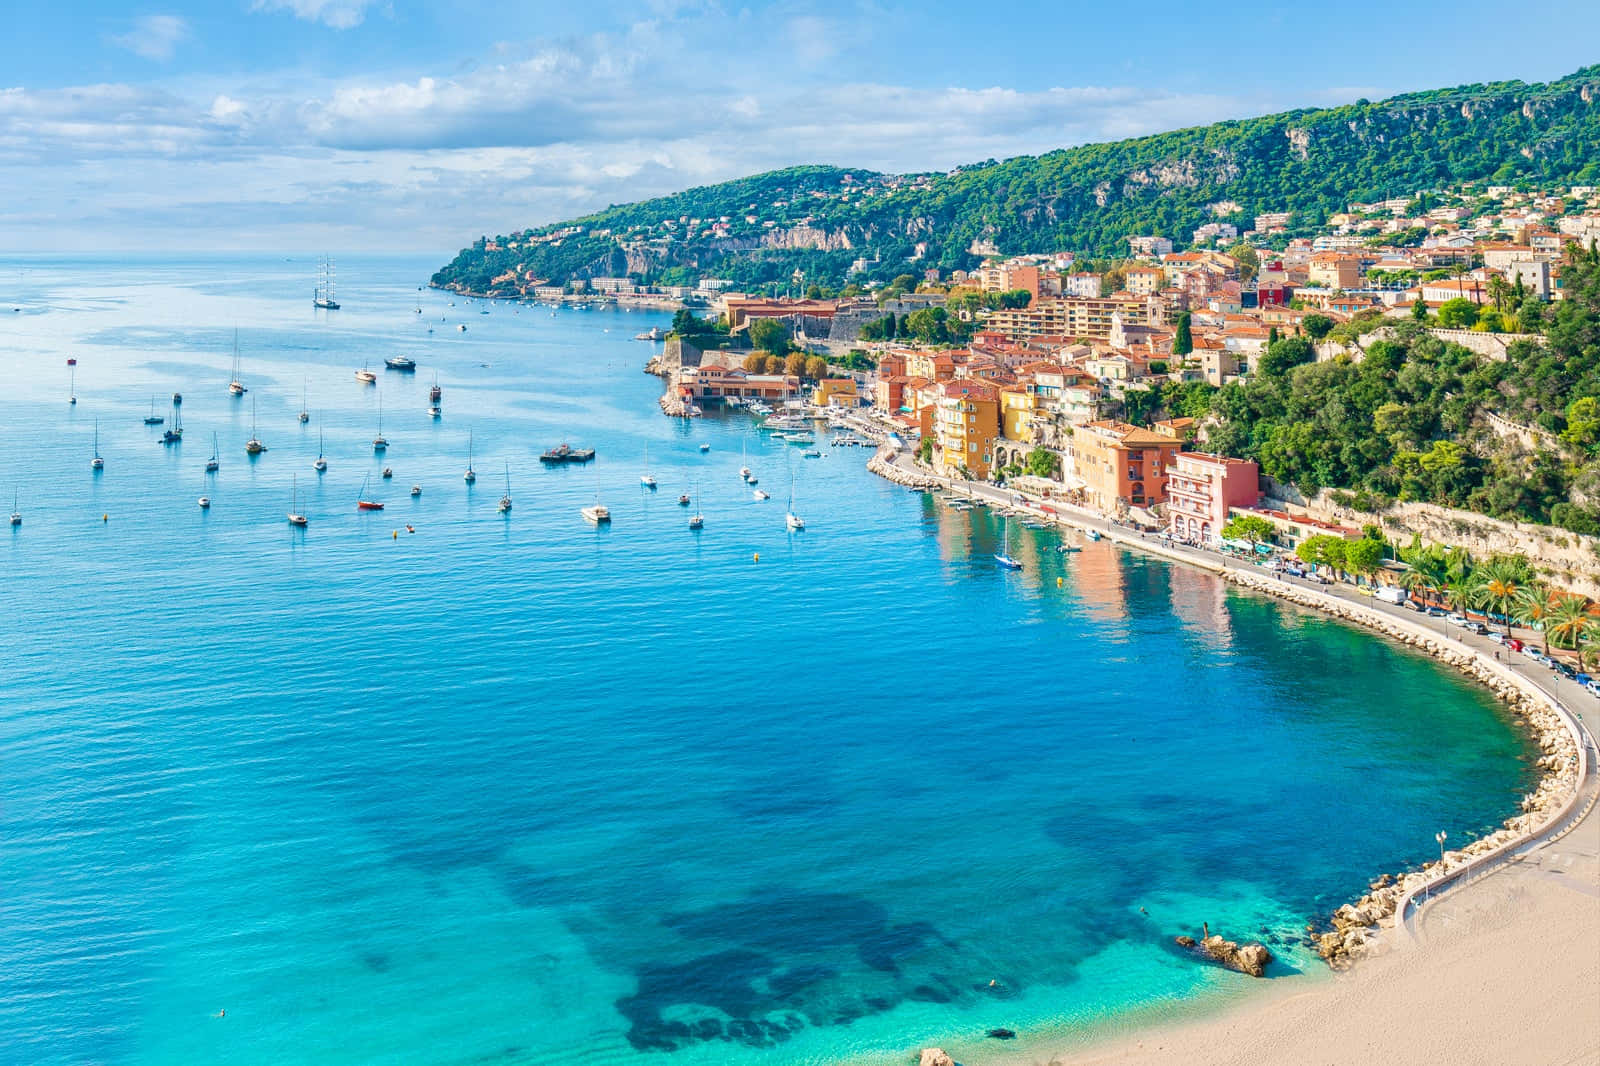 View of the beautiful city of Nice, France